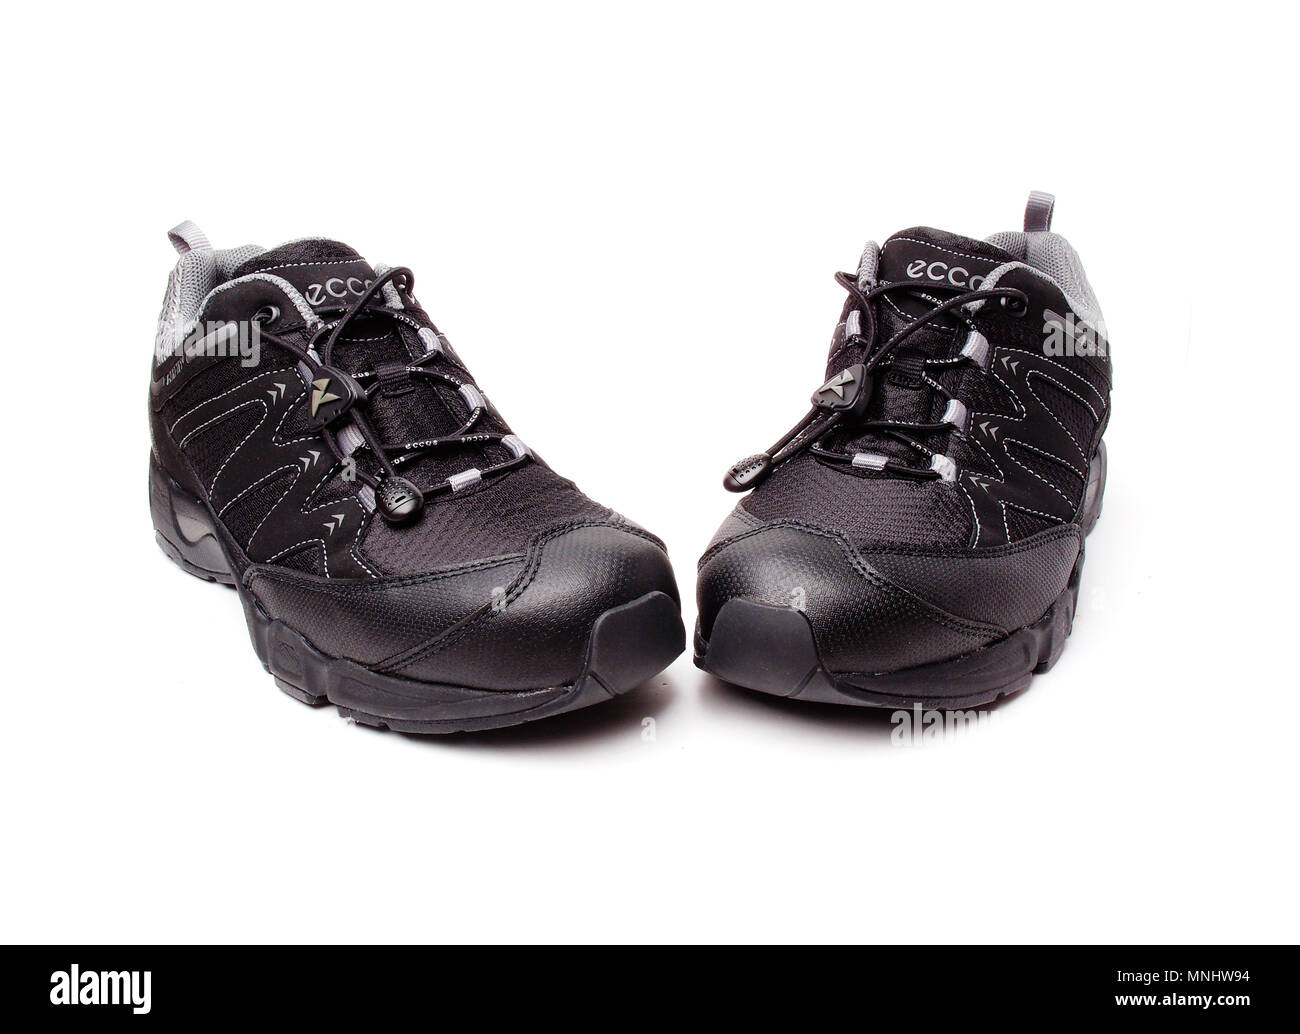 Ecco Mens Shoes High Resolution Stock Photography and Images - Alamy